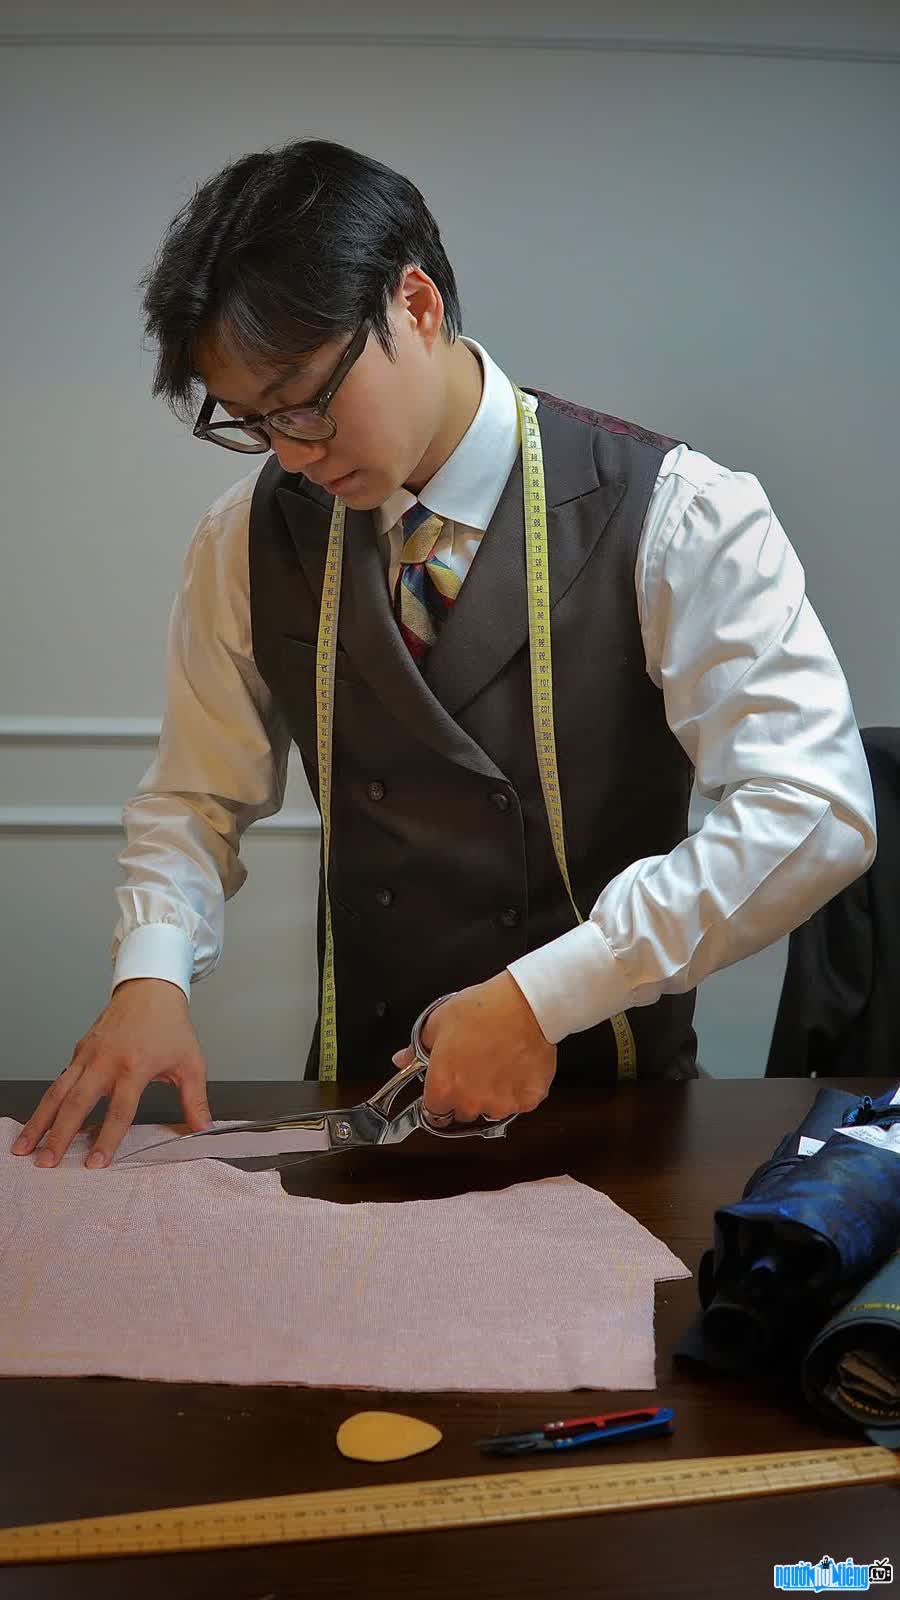 Le Thanh Hung is currently operating a tailor shop for European clothes